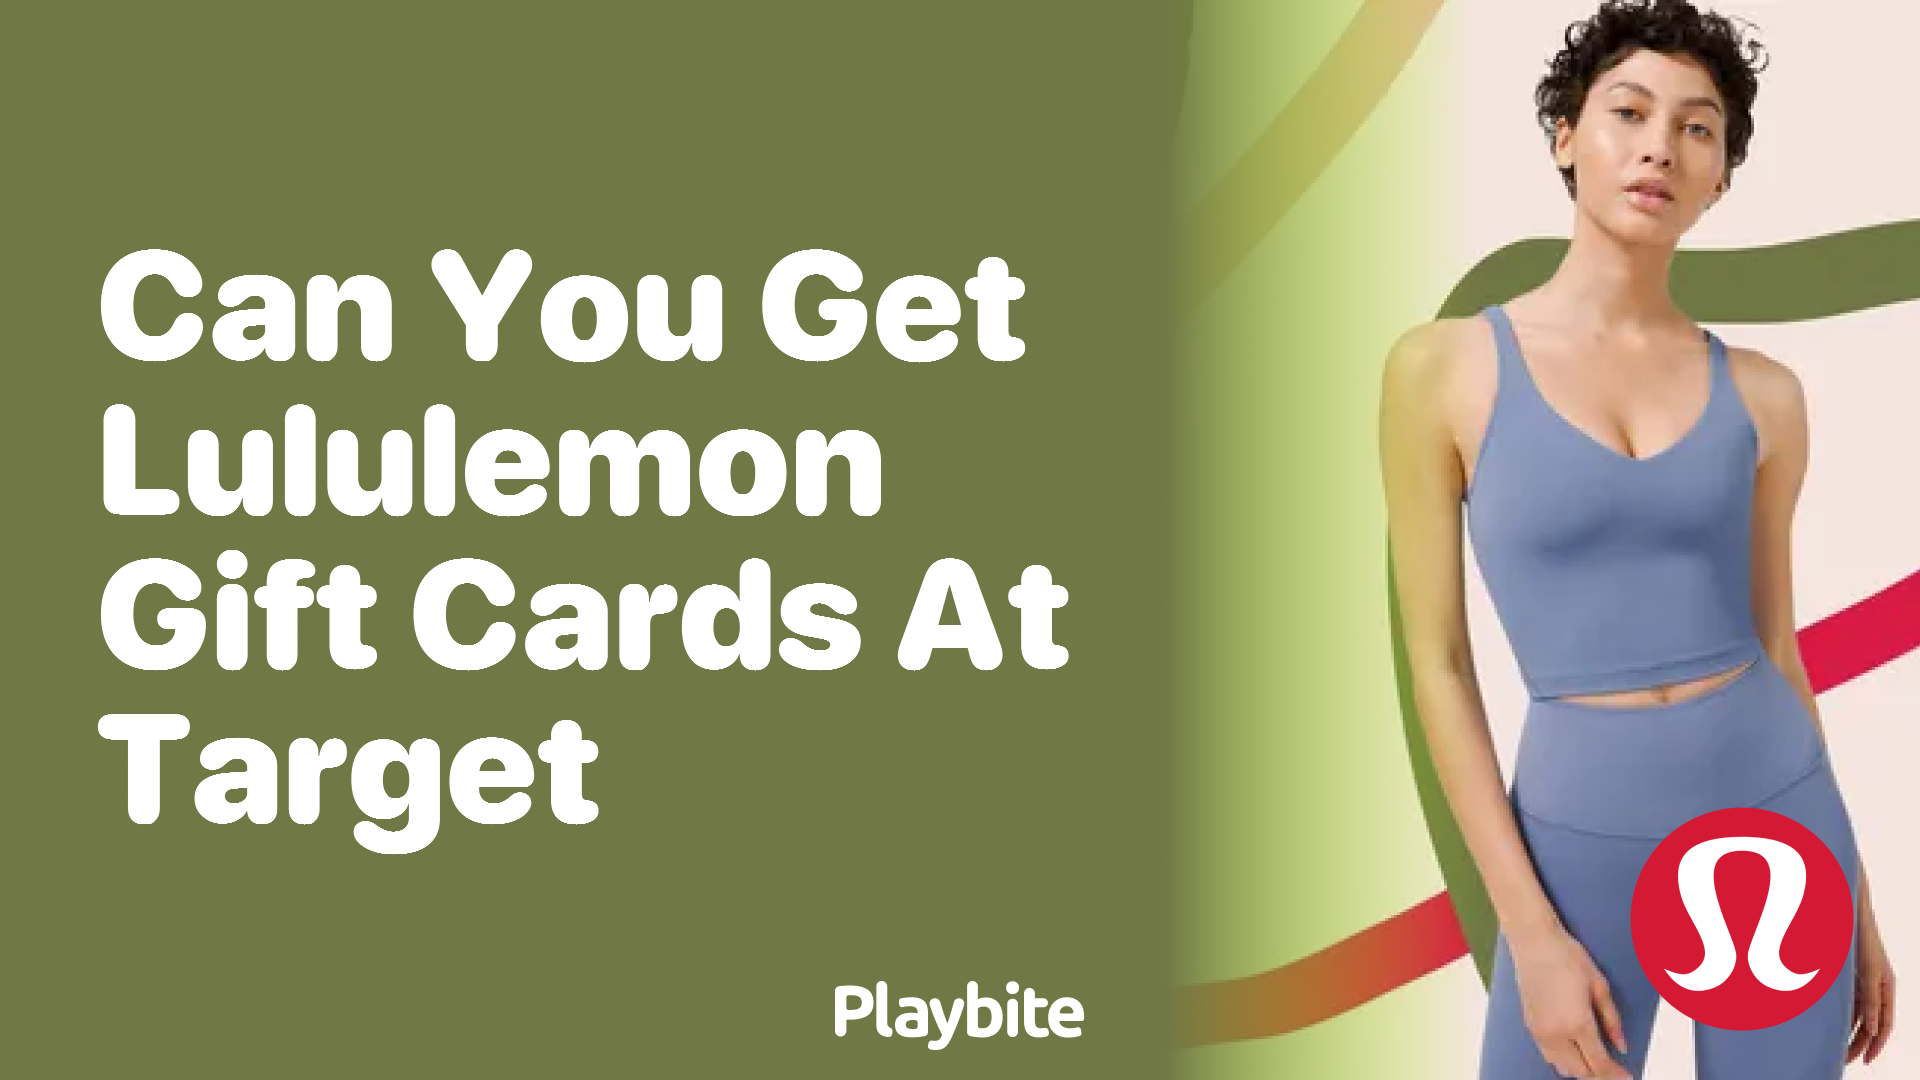 Can You Get Lululemon Gift Cards at Target? - Playbite